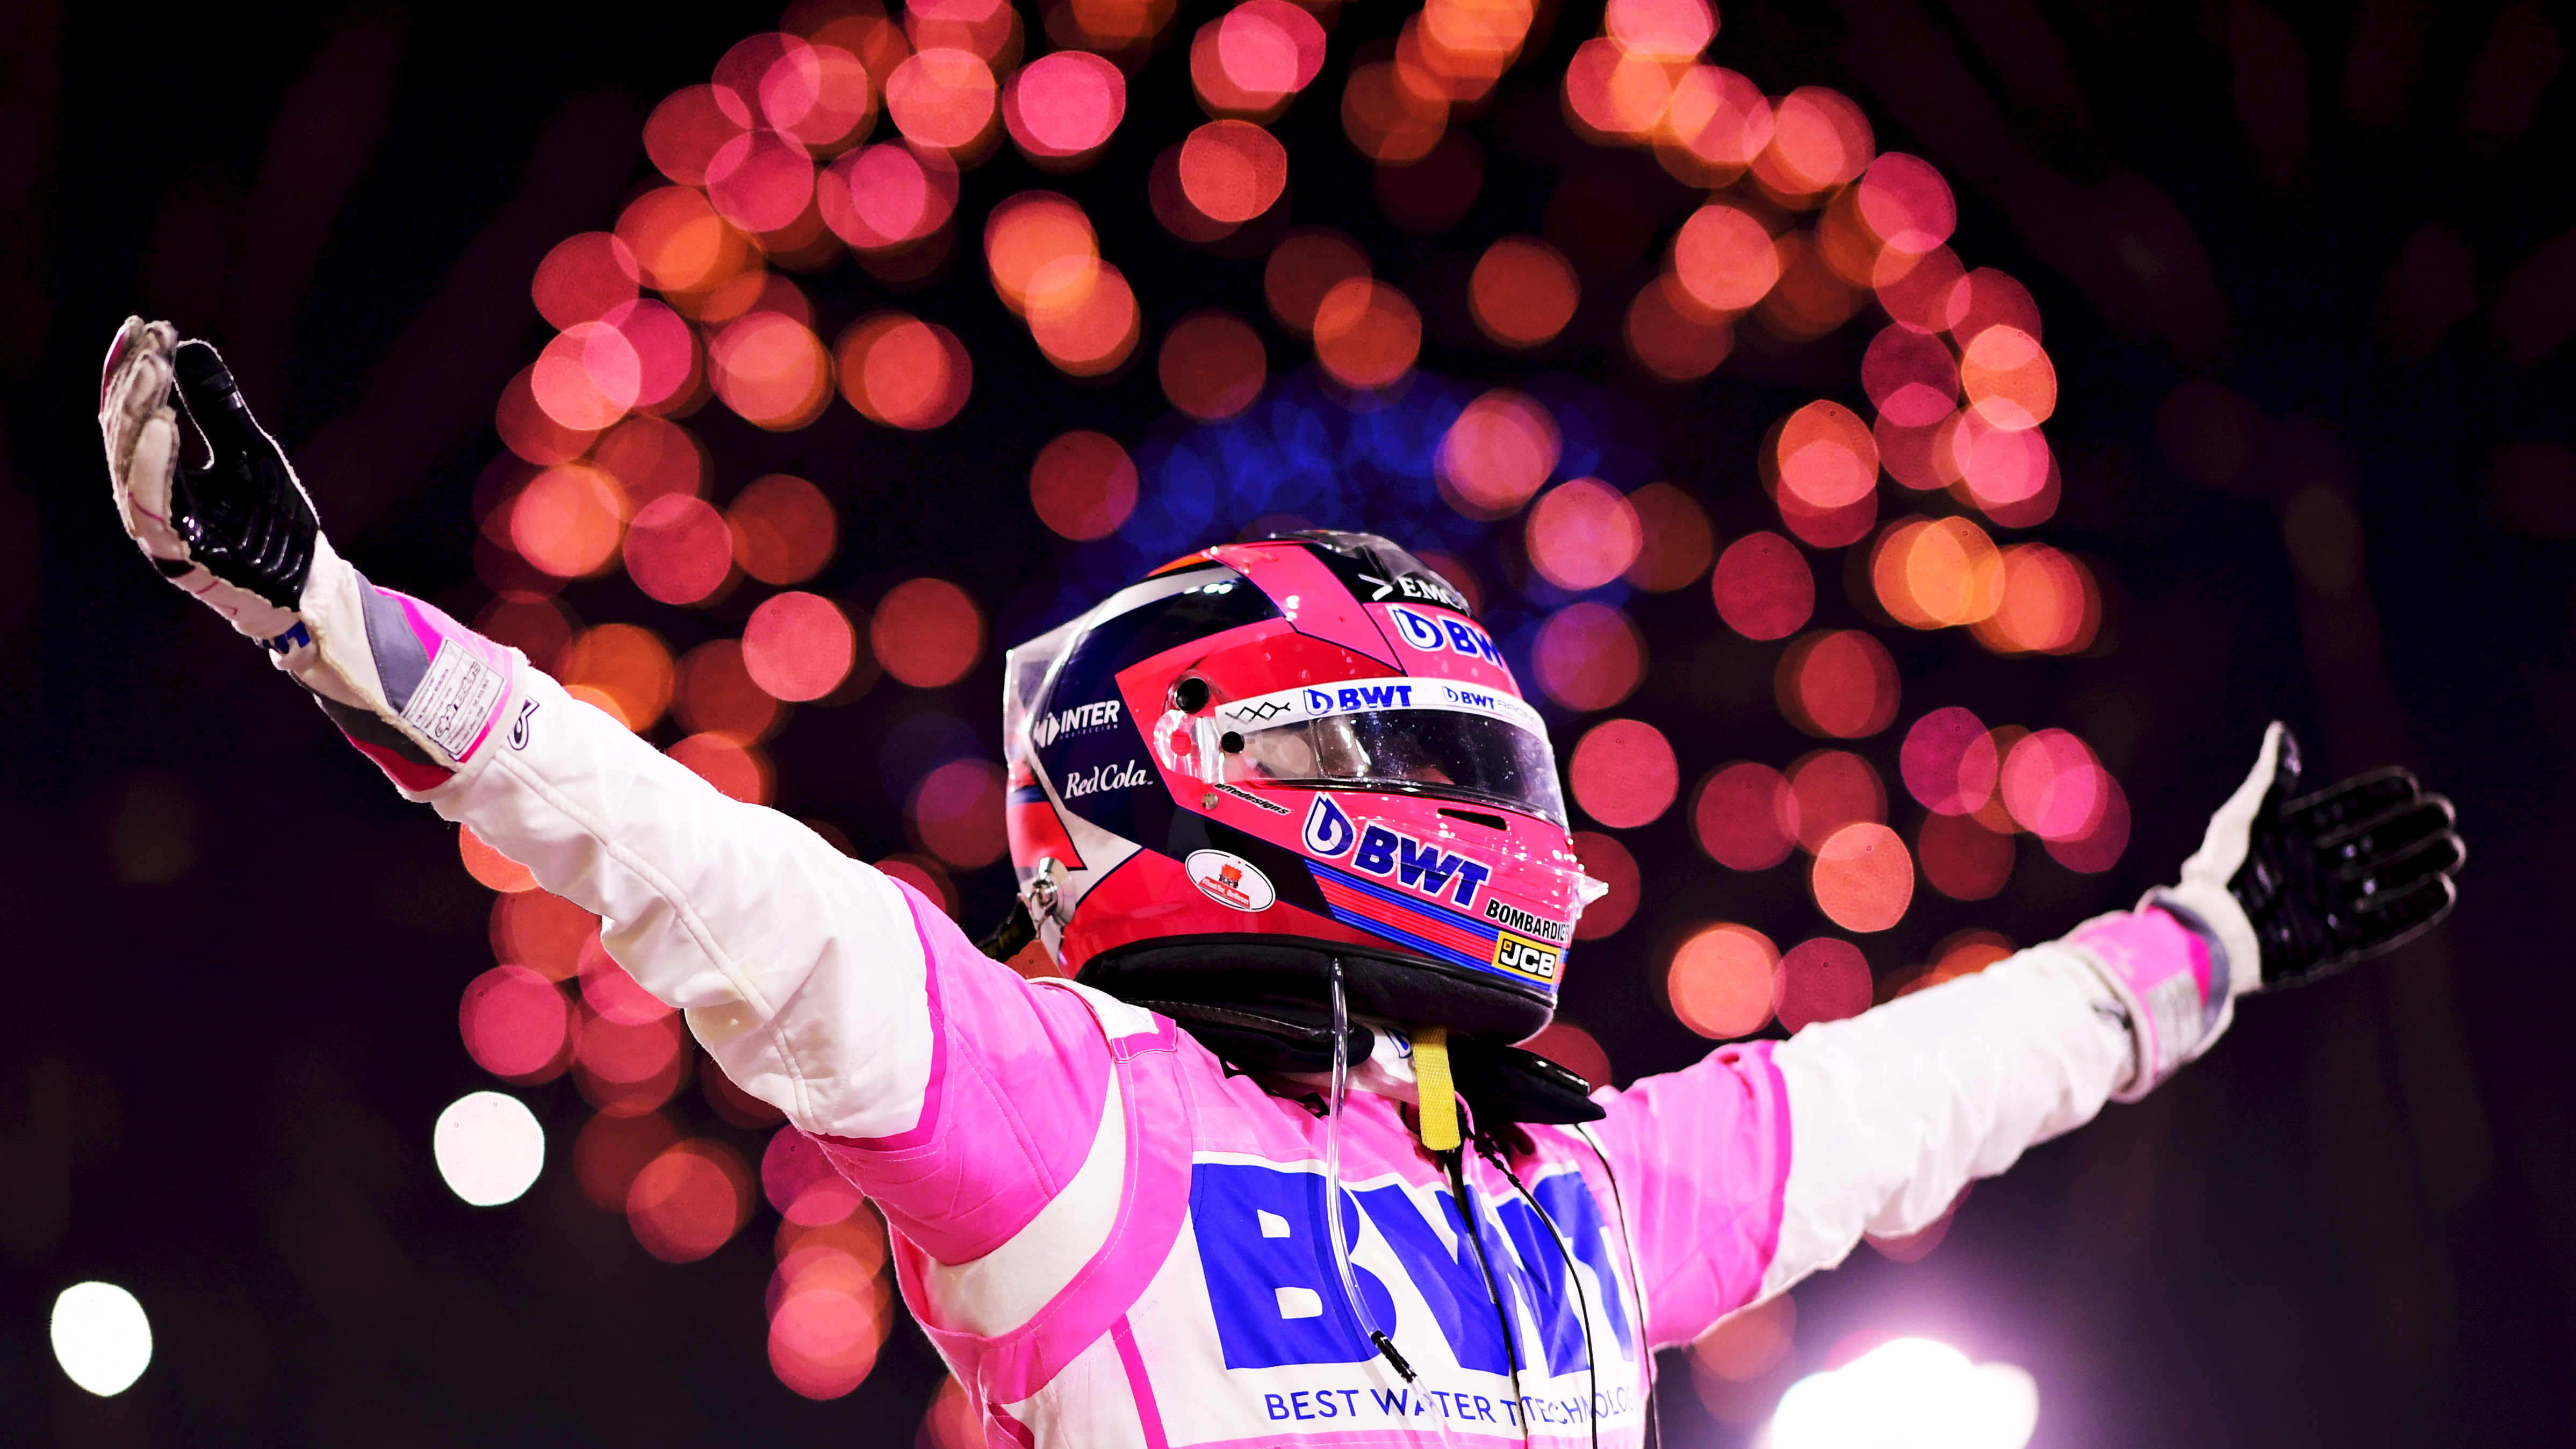 Chewing gum Subordinate Stab WATCH: From last to first – how did Sergio Perez win the Sakhir Grand Prix?  | Formula 1®